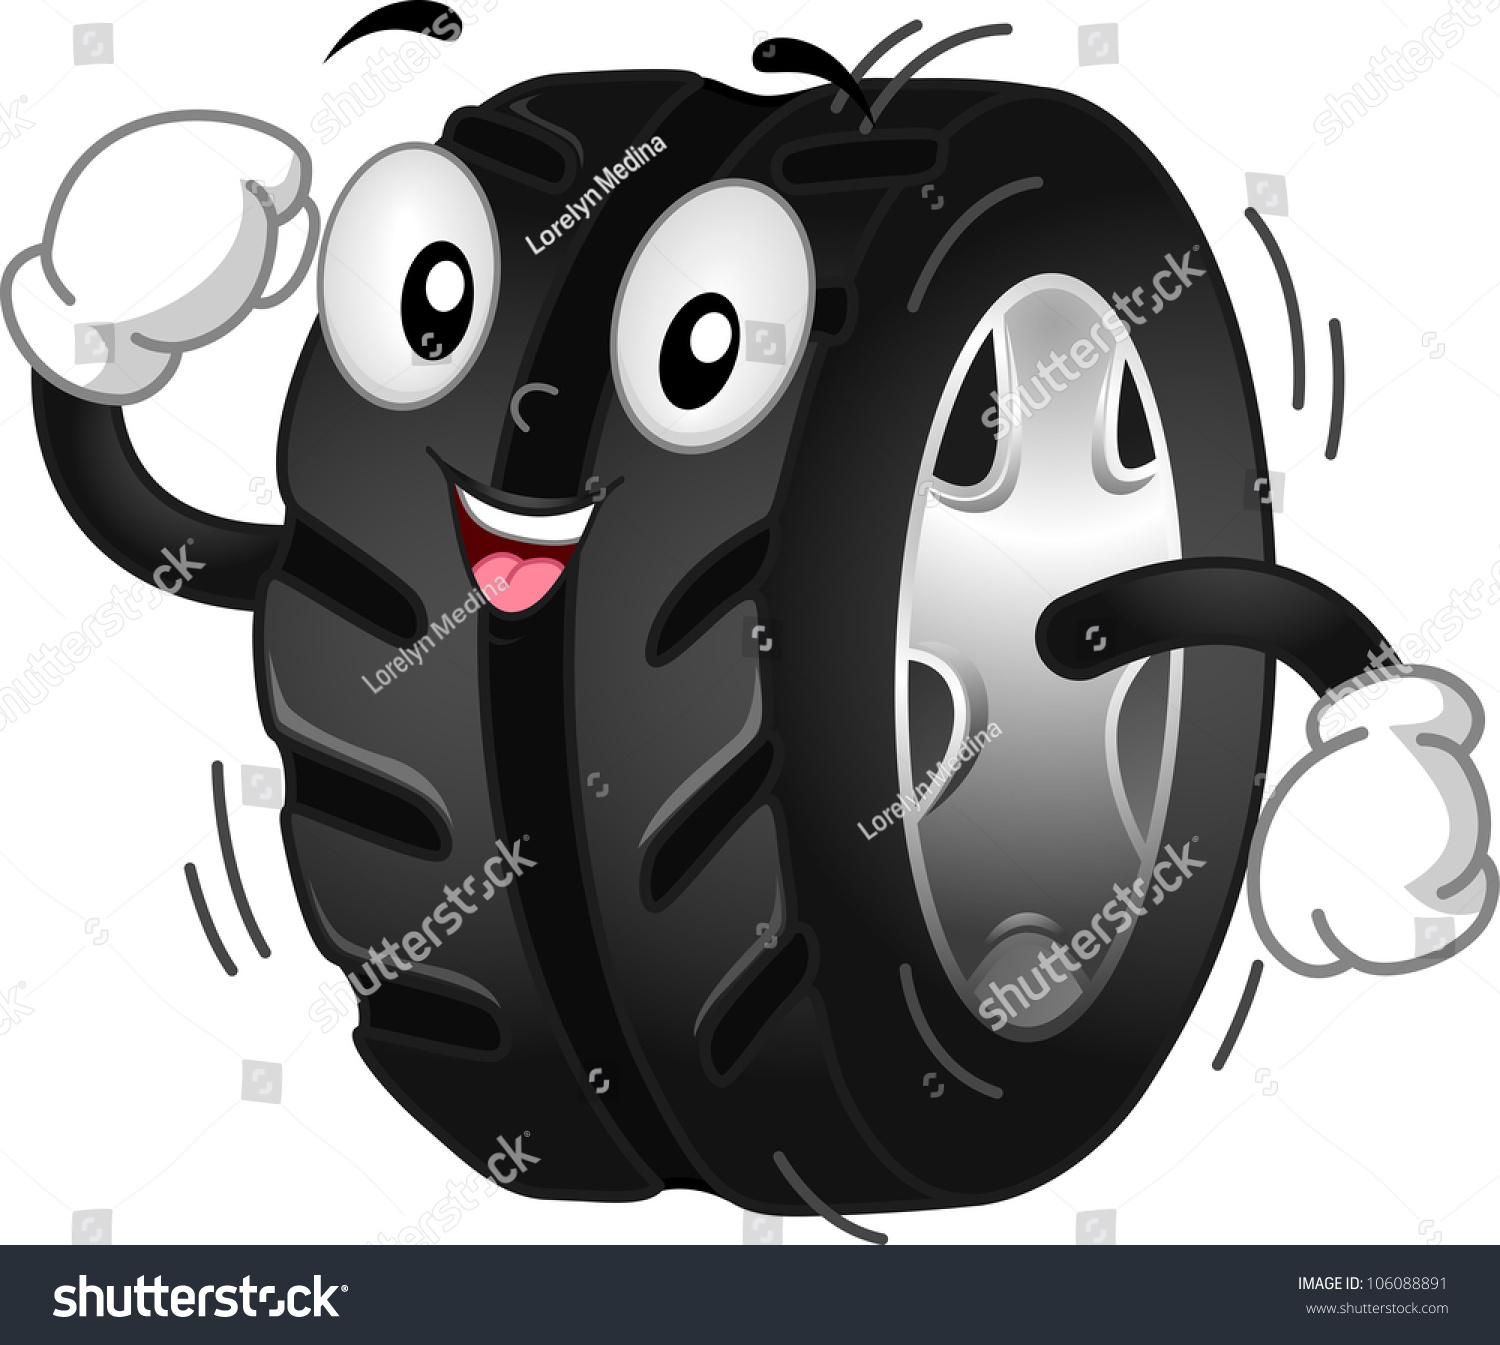 Mascot Illustration Featuring A Running/Rolling Tire - 106088891 ...